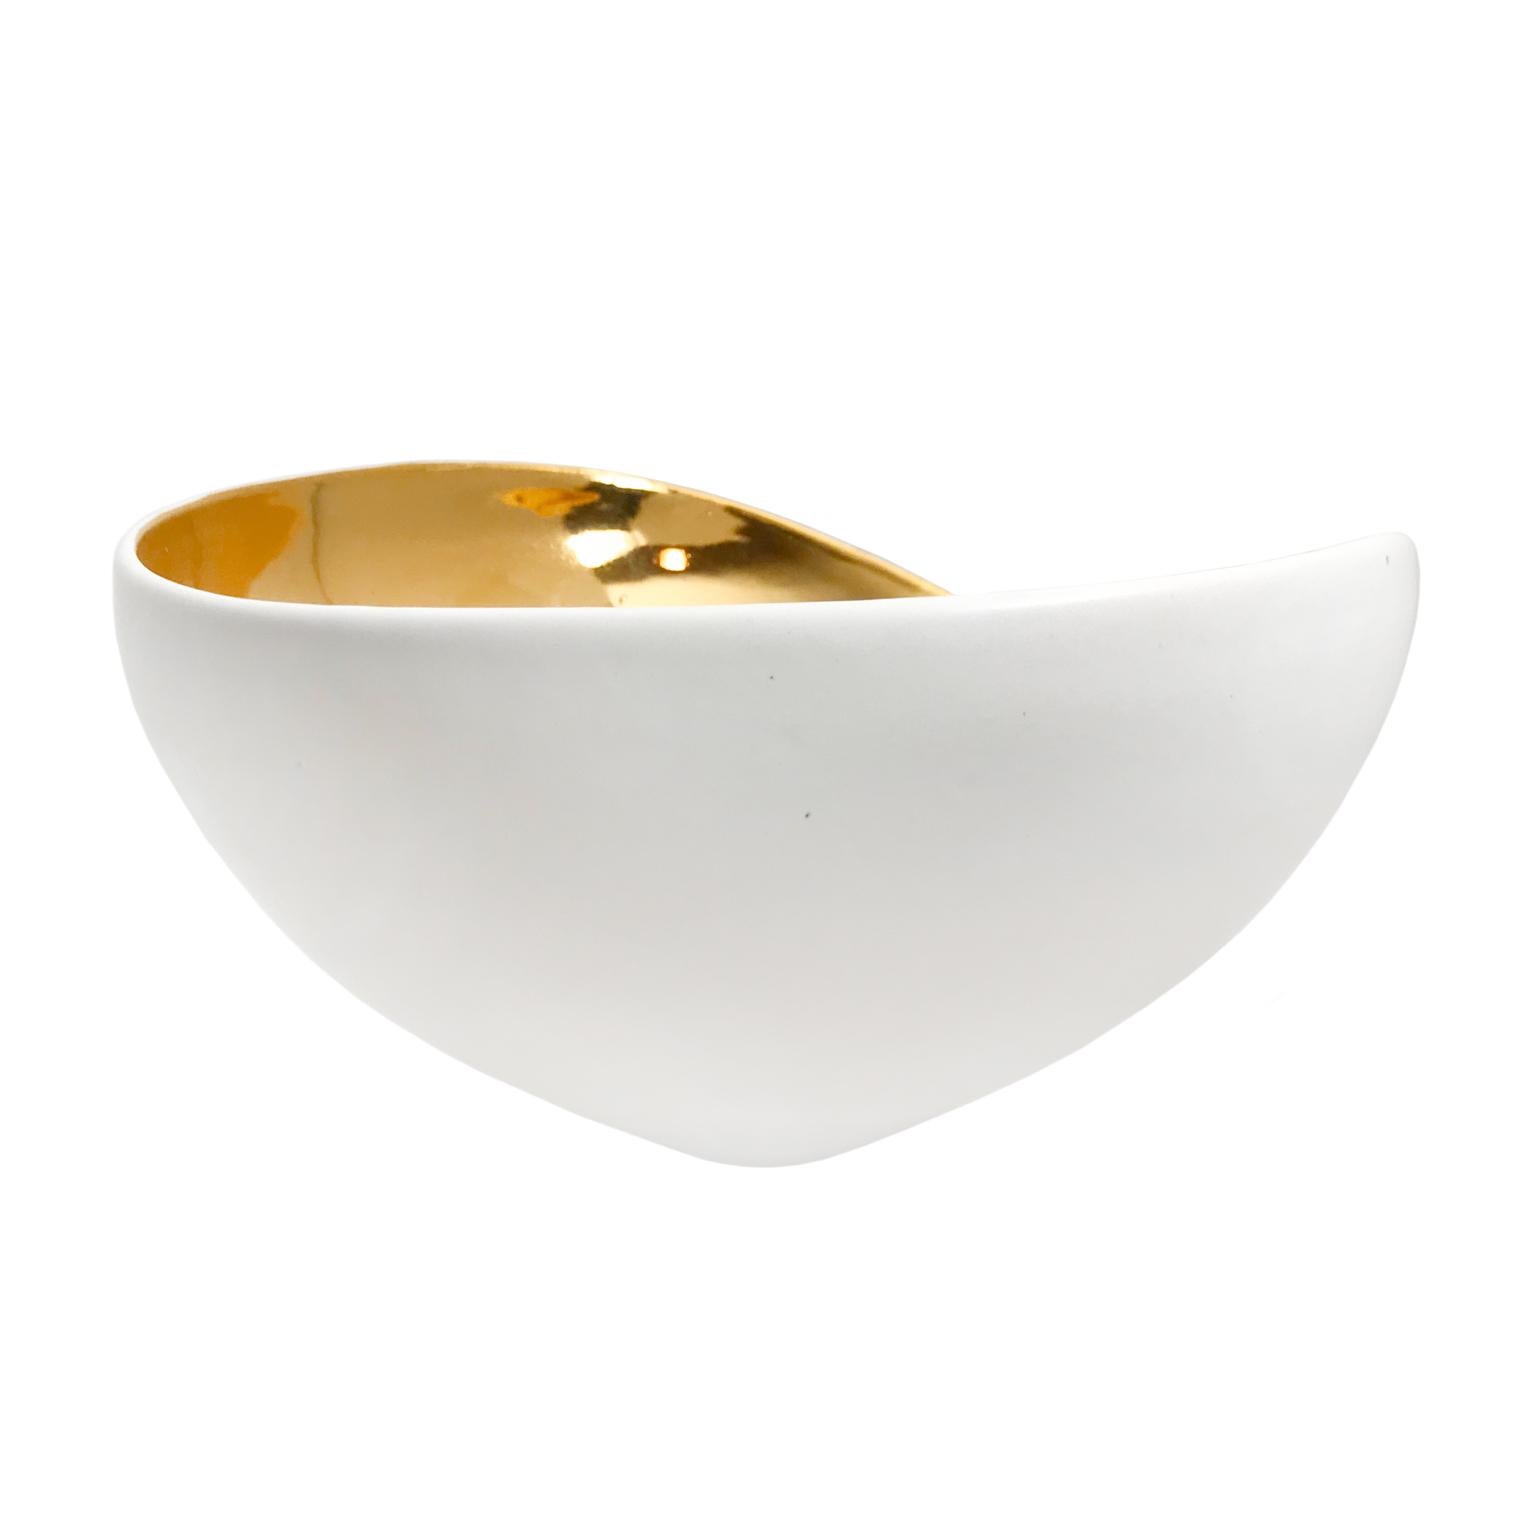 Large alabaster glaze asymmetrical ceramic bowl with 22-karat gold lustre interior by Sandi Fellman, 2018.

Veteran photographer Sandi Fellman's ceramic vessels are an exploration of a new medium. The forms, palettes, and sensuality of her photos